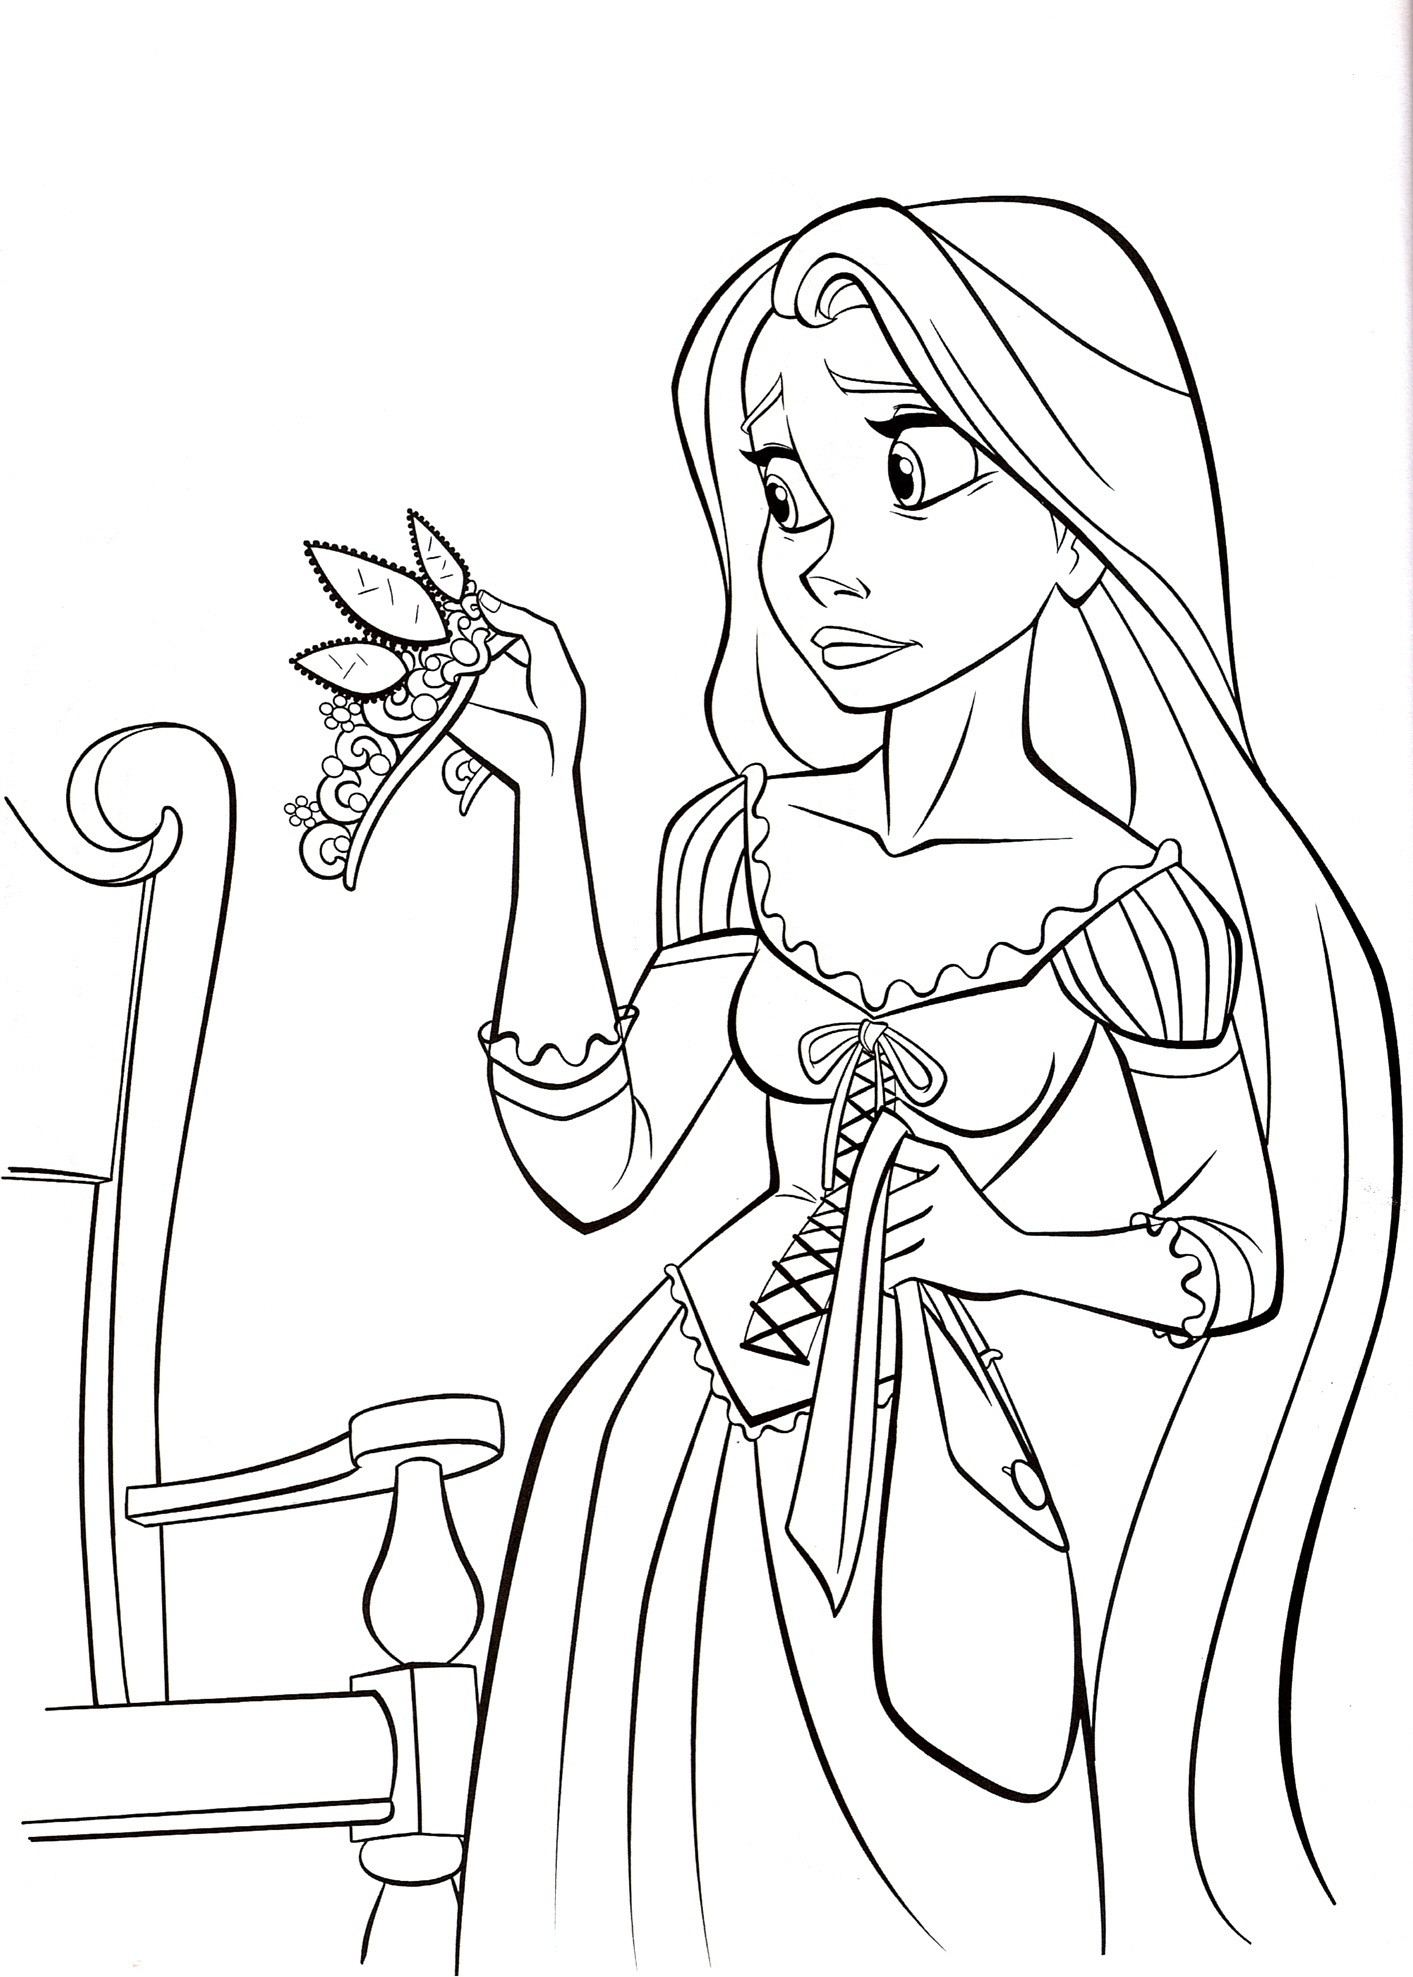 Coloring Book For Kids Online
 Playhouse Disney Coloring Pages Printable Kids Colouring